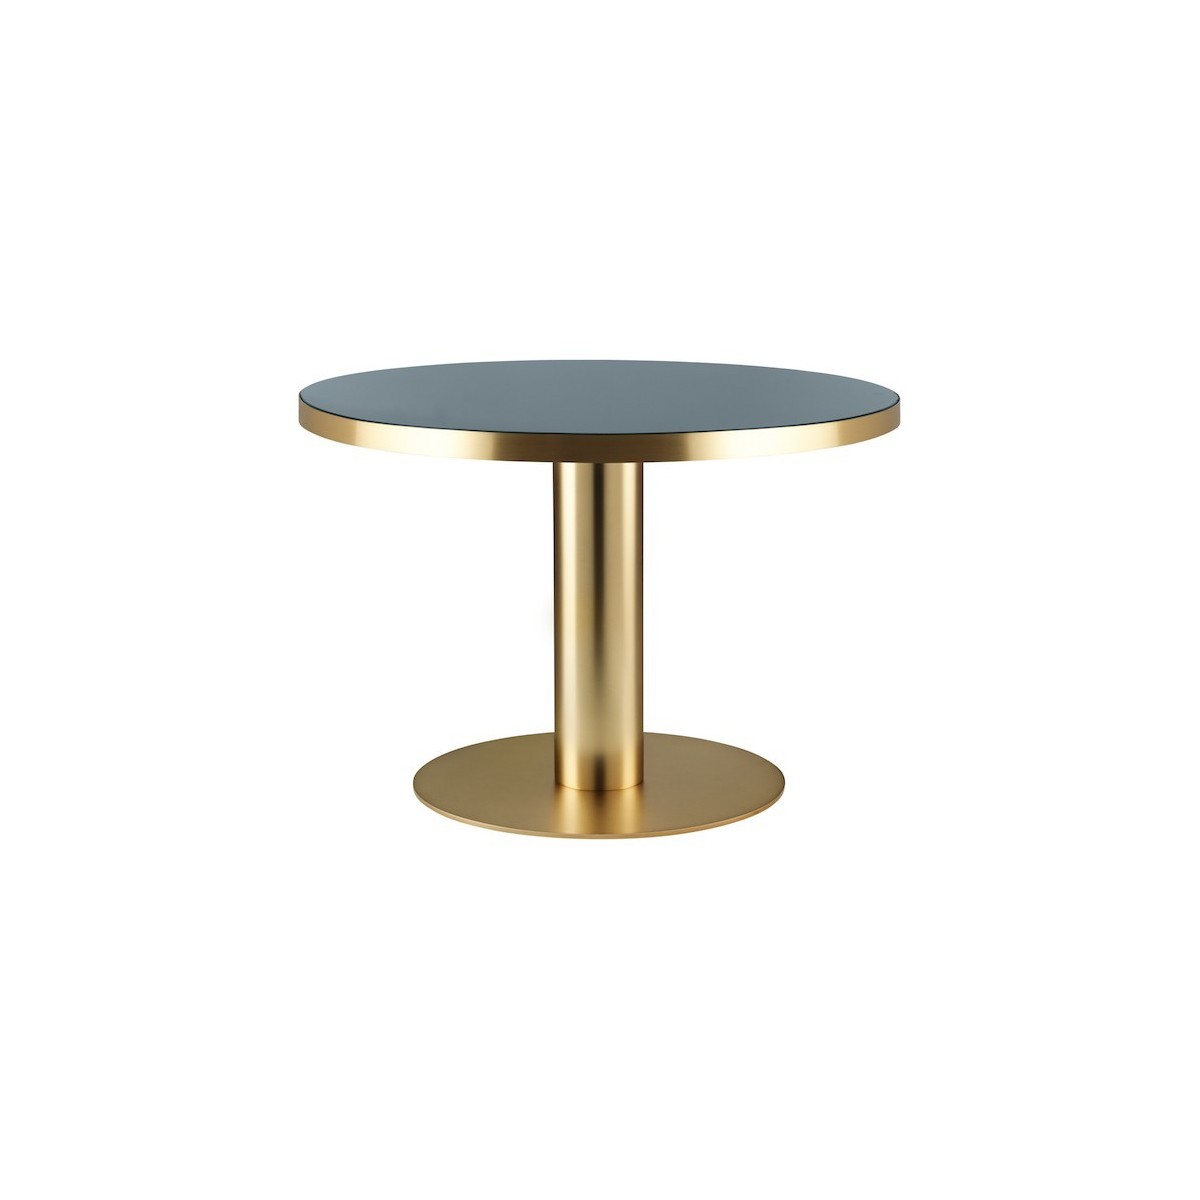 Granit grey + brass base - Gubi 2.0 round table - glass table top